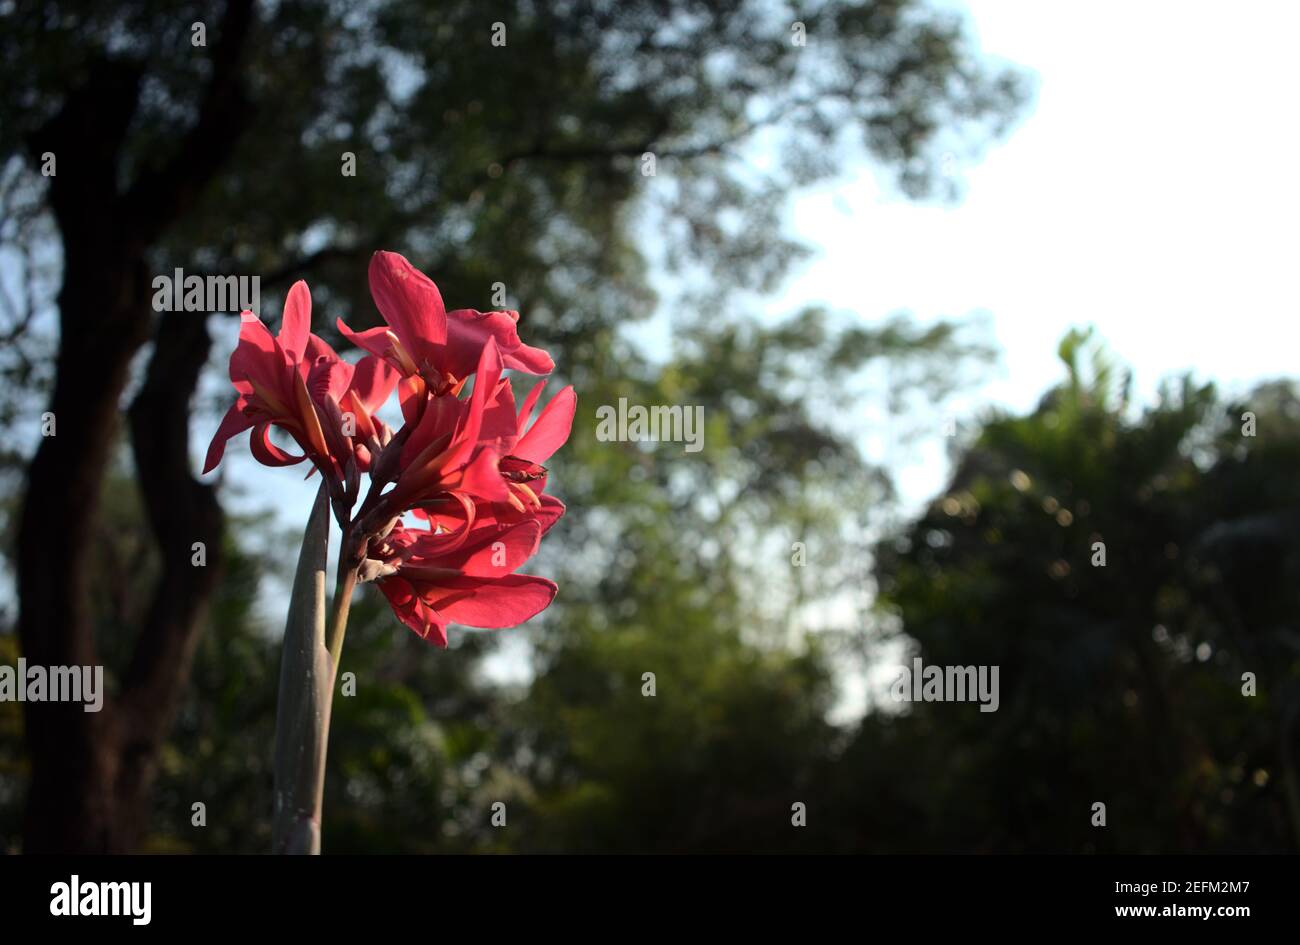 Bright light scarlet red canna lily jungle with blurry nature tree bokeh abstract texture background. Copy space, off-center. Low angle view, head on. Stock Photo